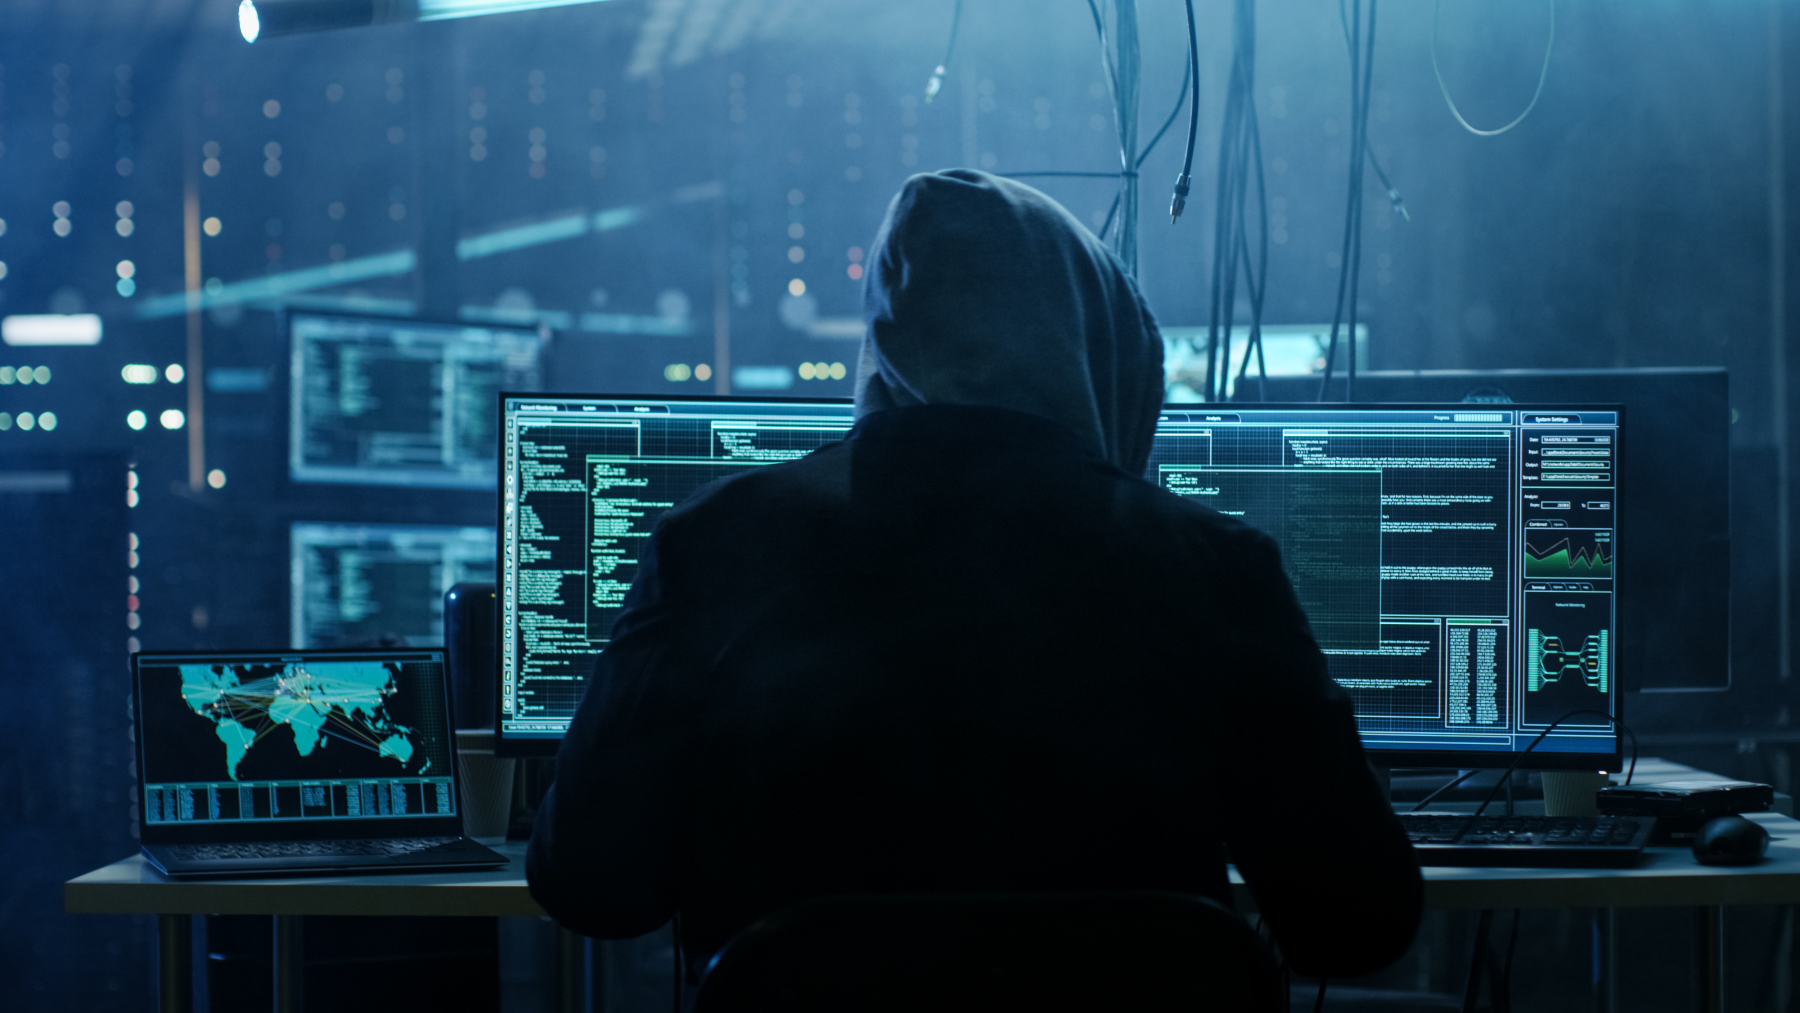 Darknet marketplace Solaris hacked by competitor
